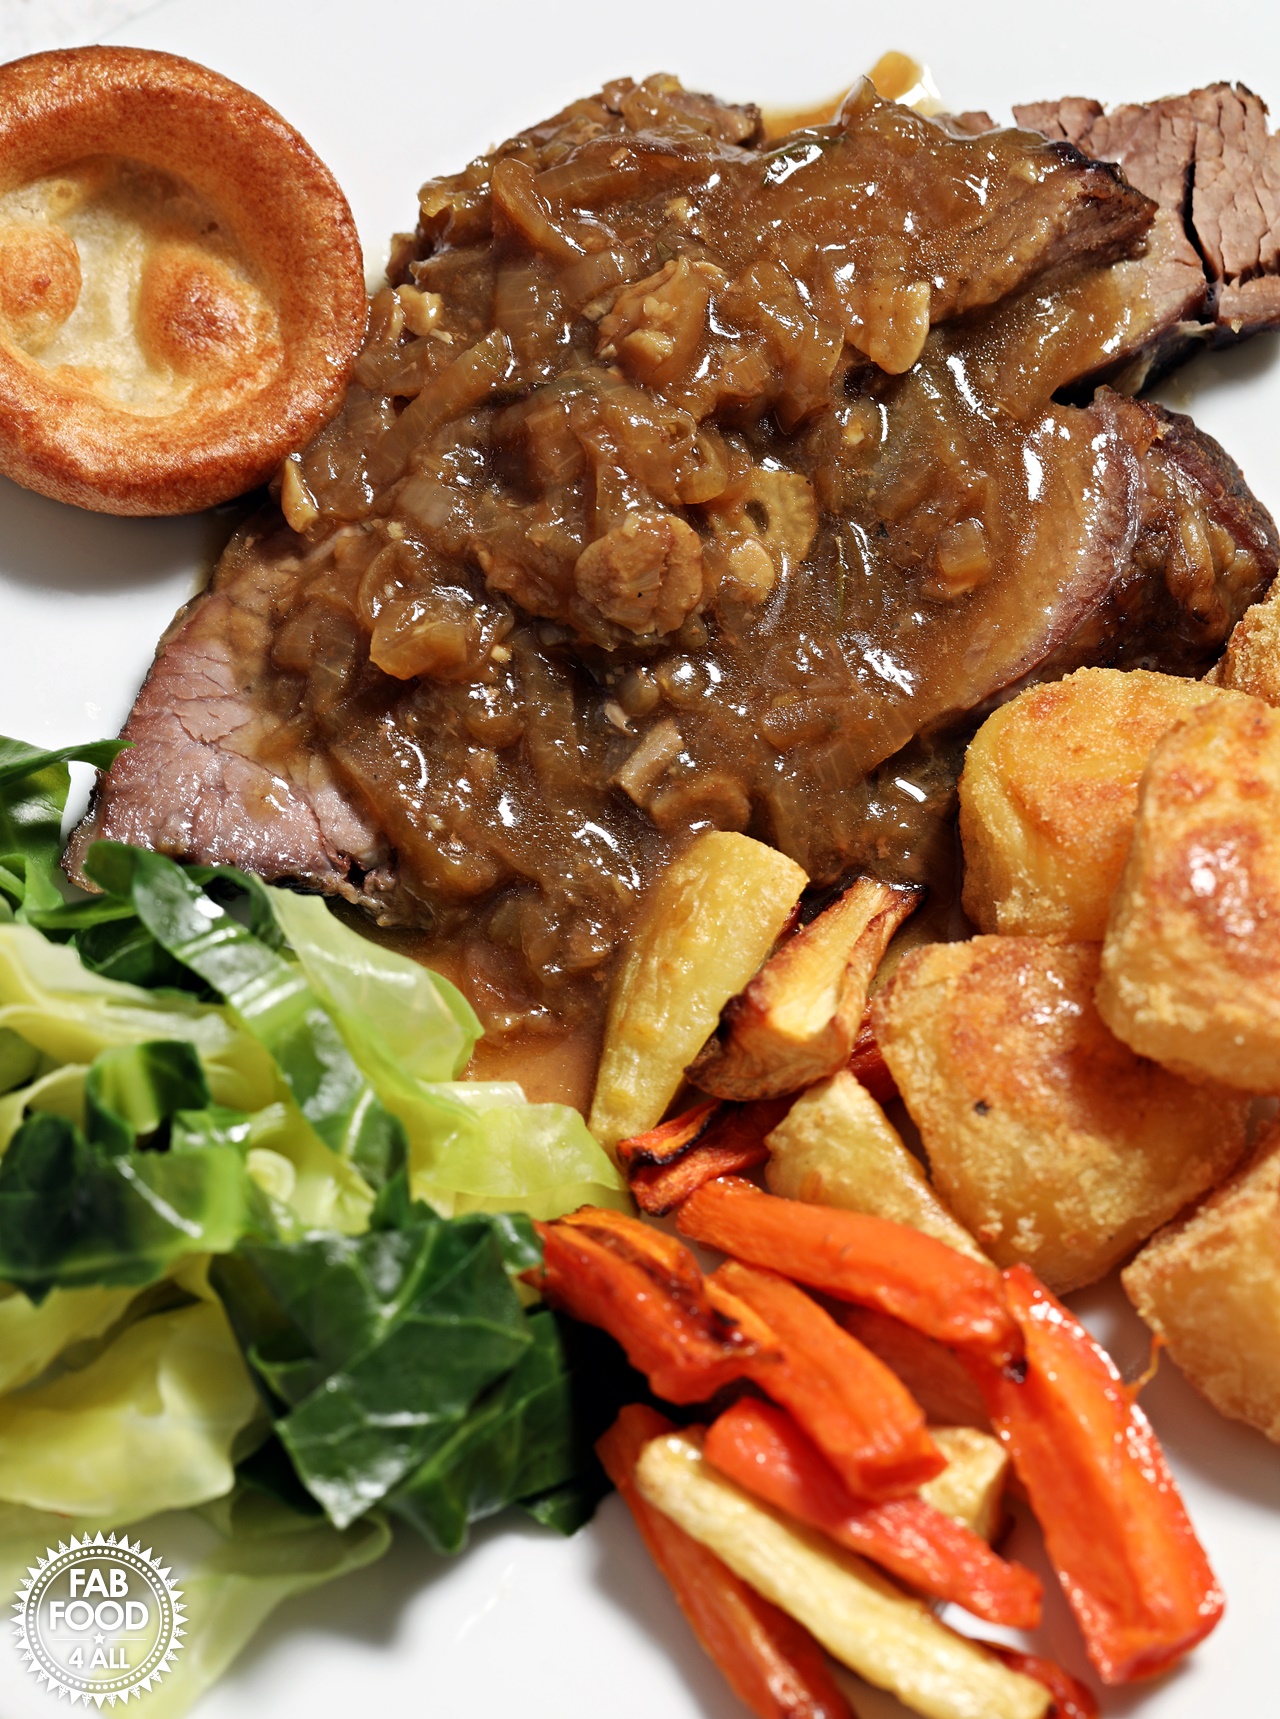 Slow cooked beef brisket with onion gravy, roast potatoes and vegetables on a plate.